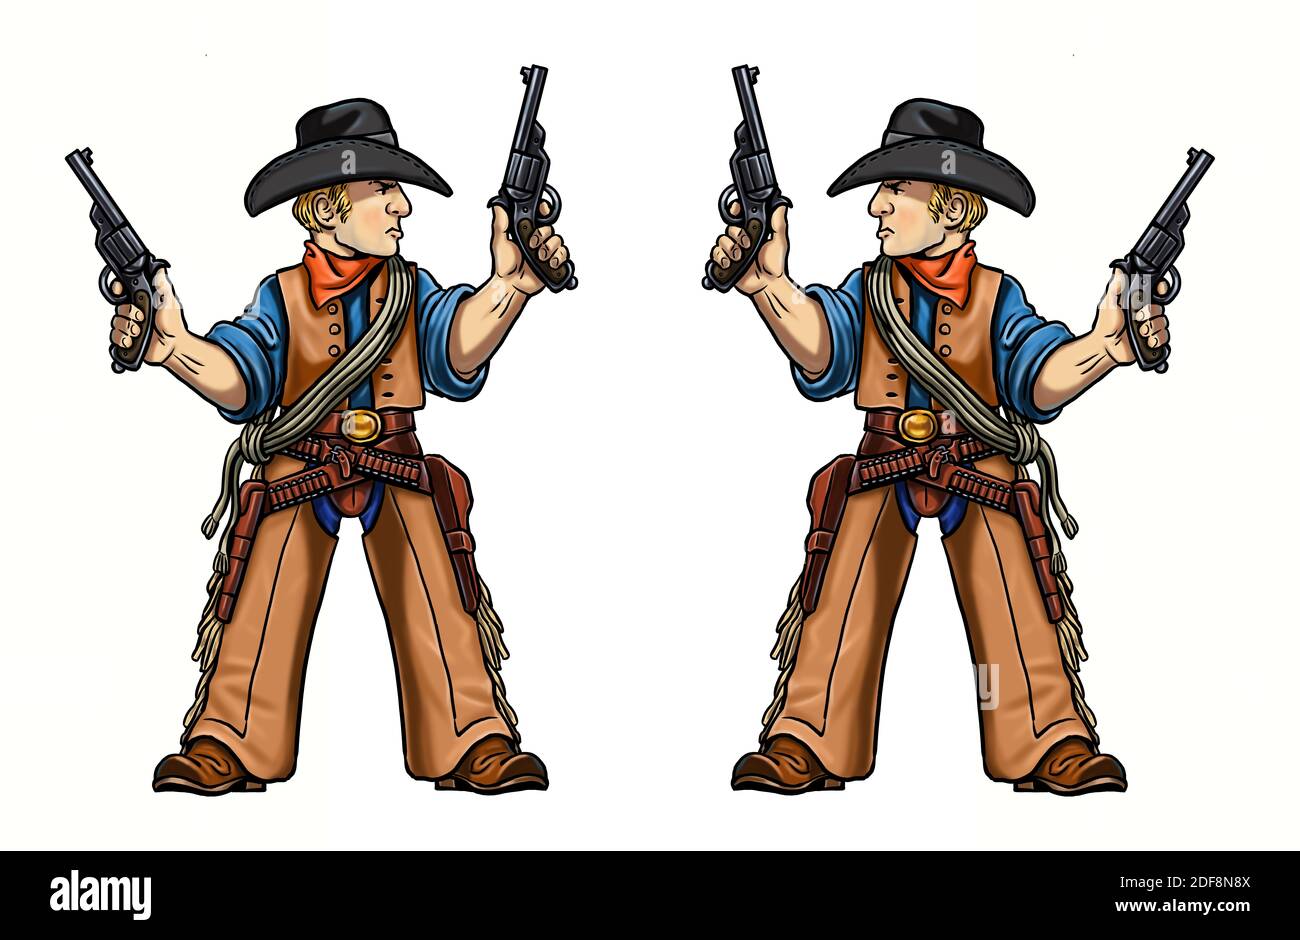 Wild west gunfighter cartoon. Cowboy template for coloring book. Stock Photo